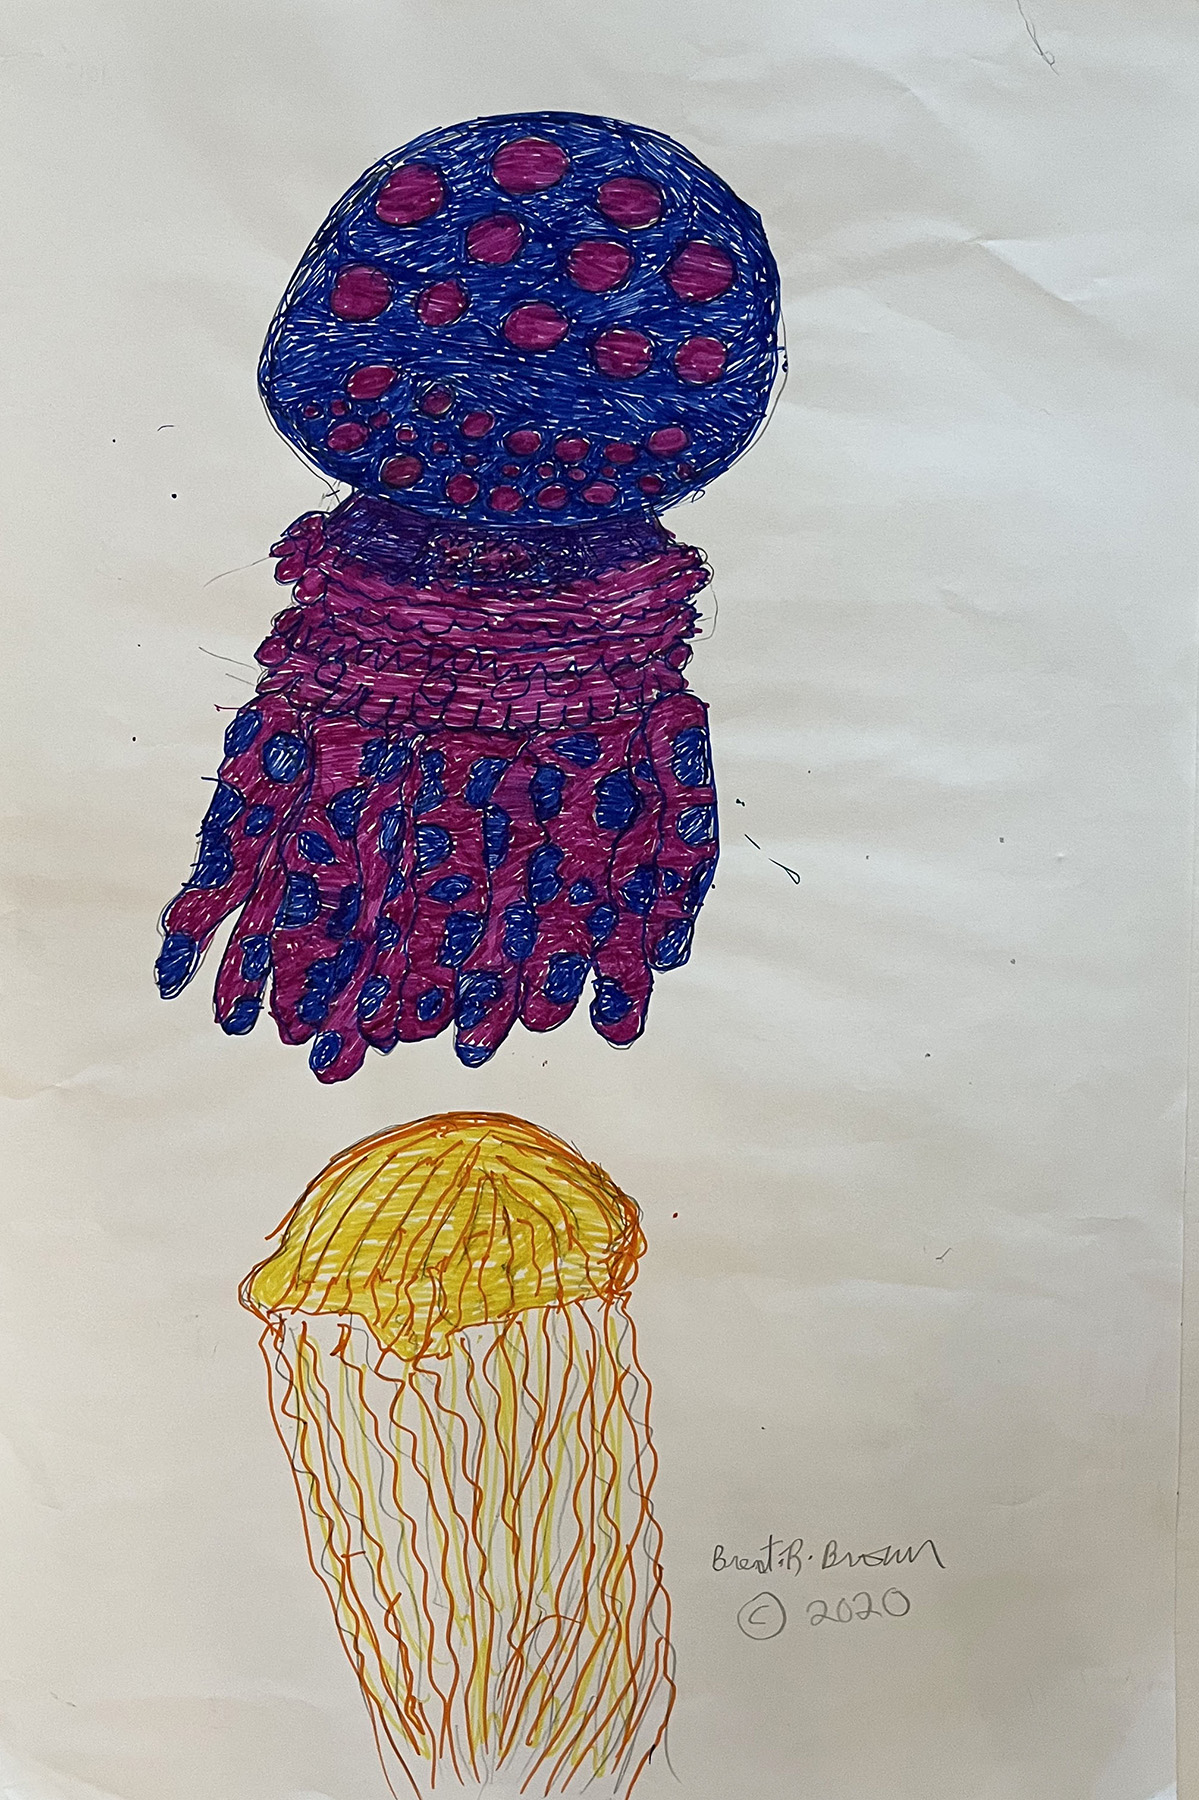 Brent Brown BRB1015 | Jelly Fish, 2020 at the Outsider Folk Art Gallery